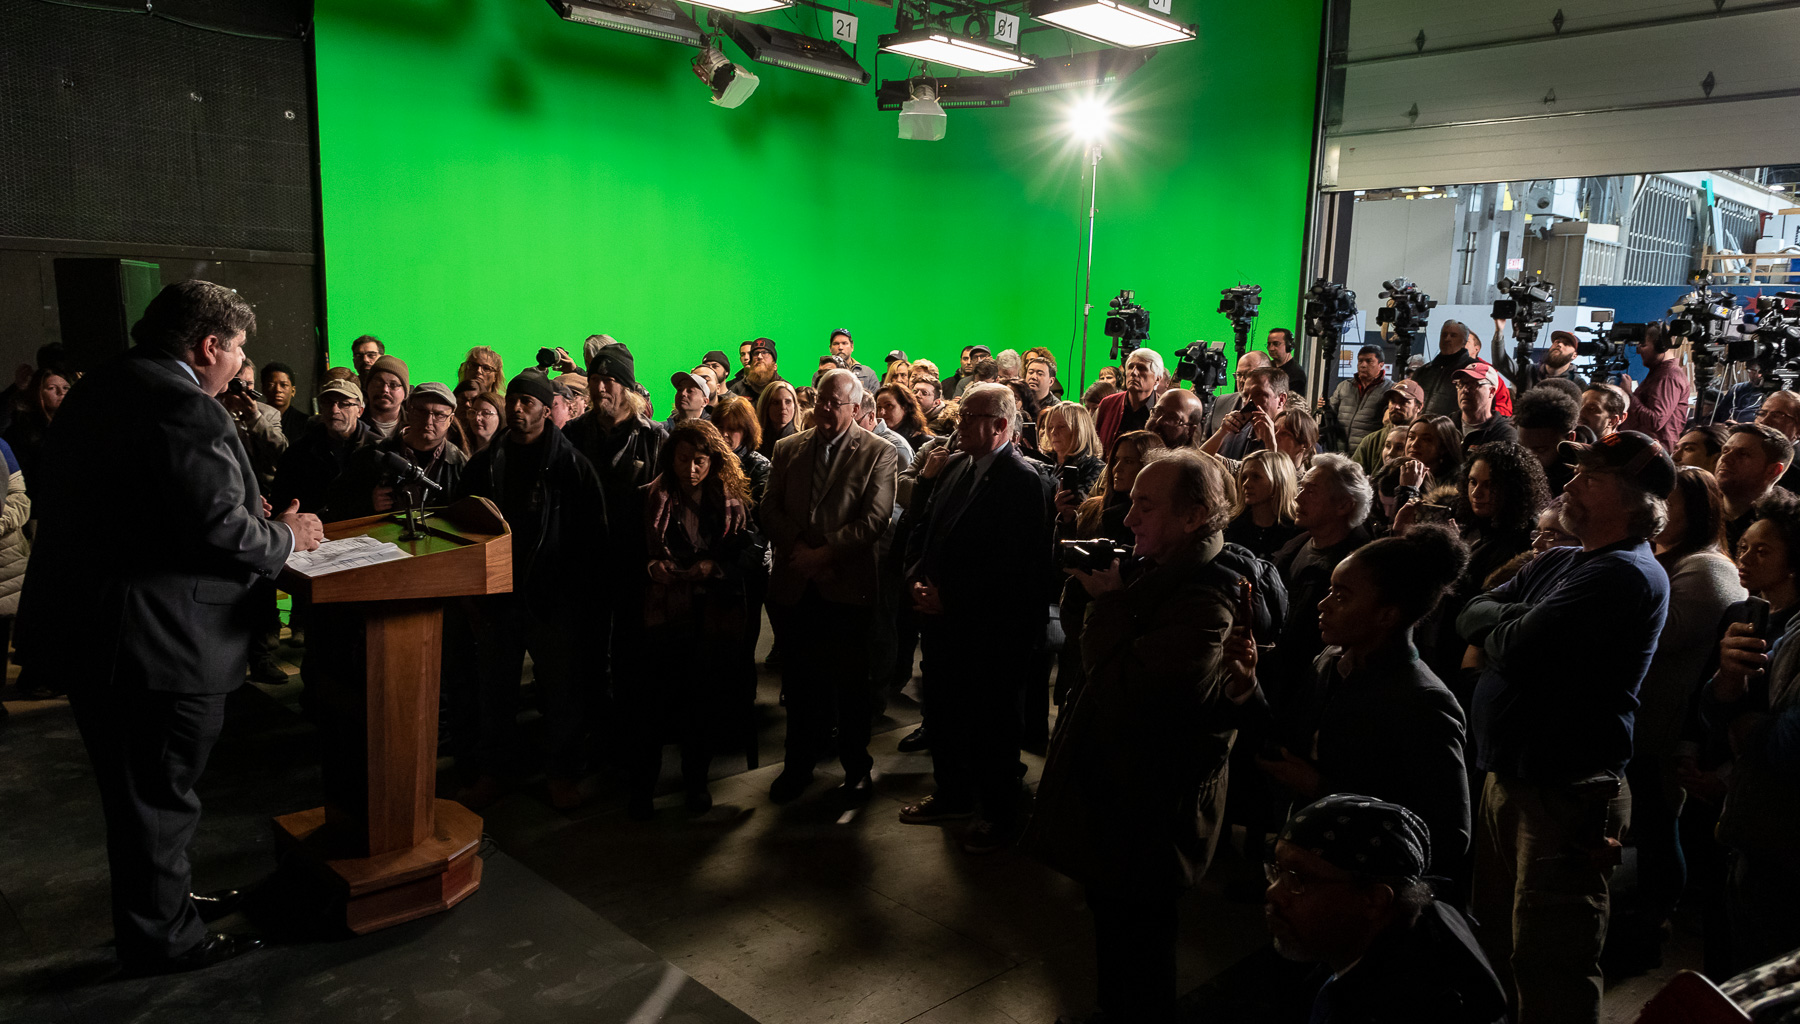 Illinois Governor JB Pritzker speaks during a visit to Cinespace Chicago Film Studios and DePaul University’s School of Cinematic Arts, Thursday, Feb. 28, 2019. (DePaul University/Jeff Carrion)